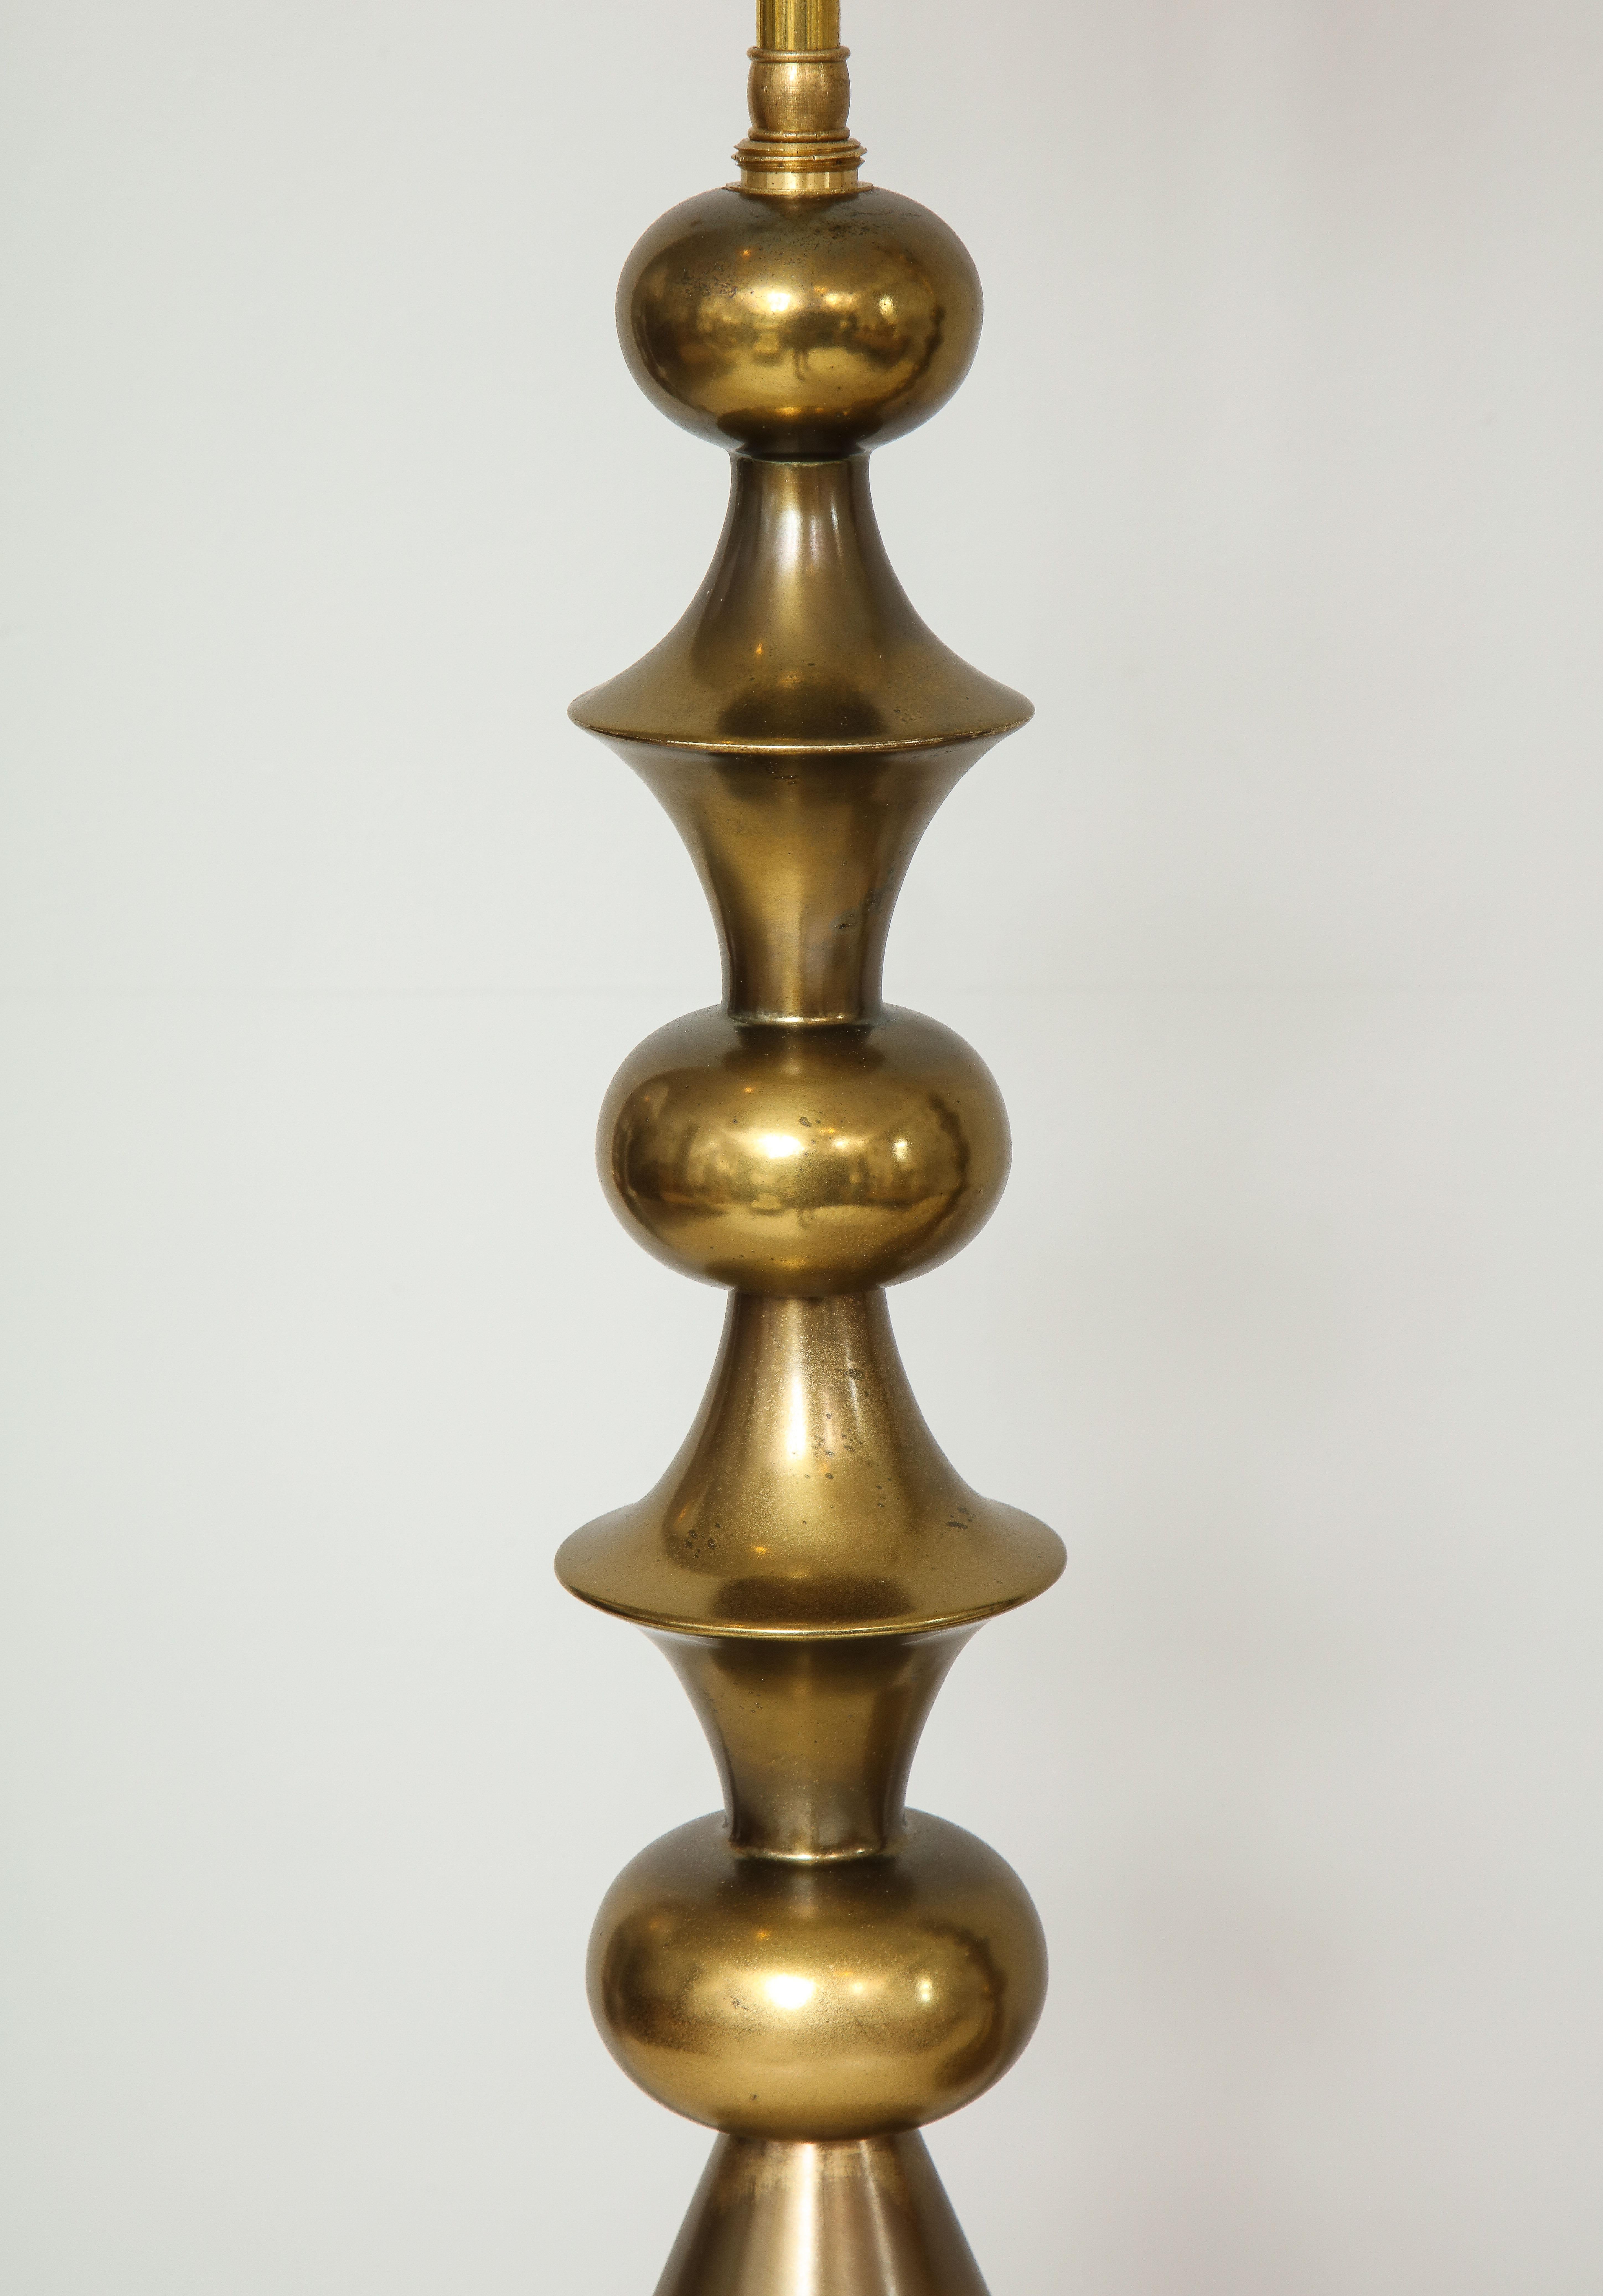 North American Pair of Mid-Century Modern Brass Table Lamps in the Manner of Tommi Parzinger